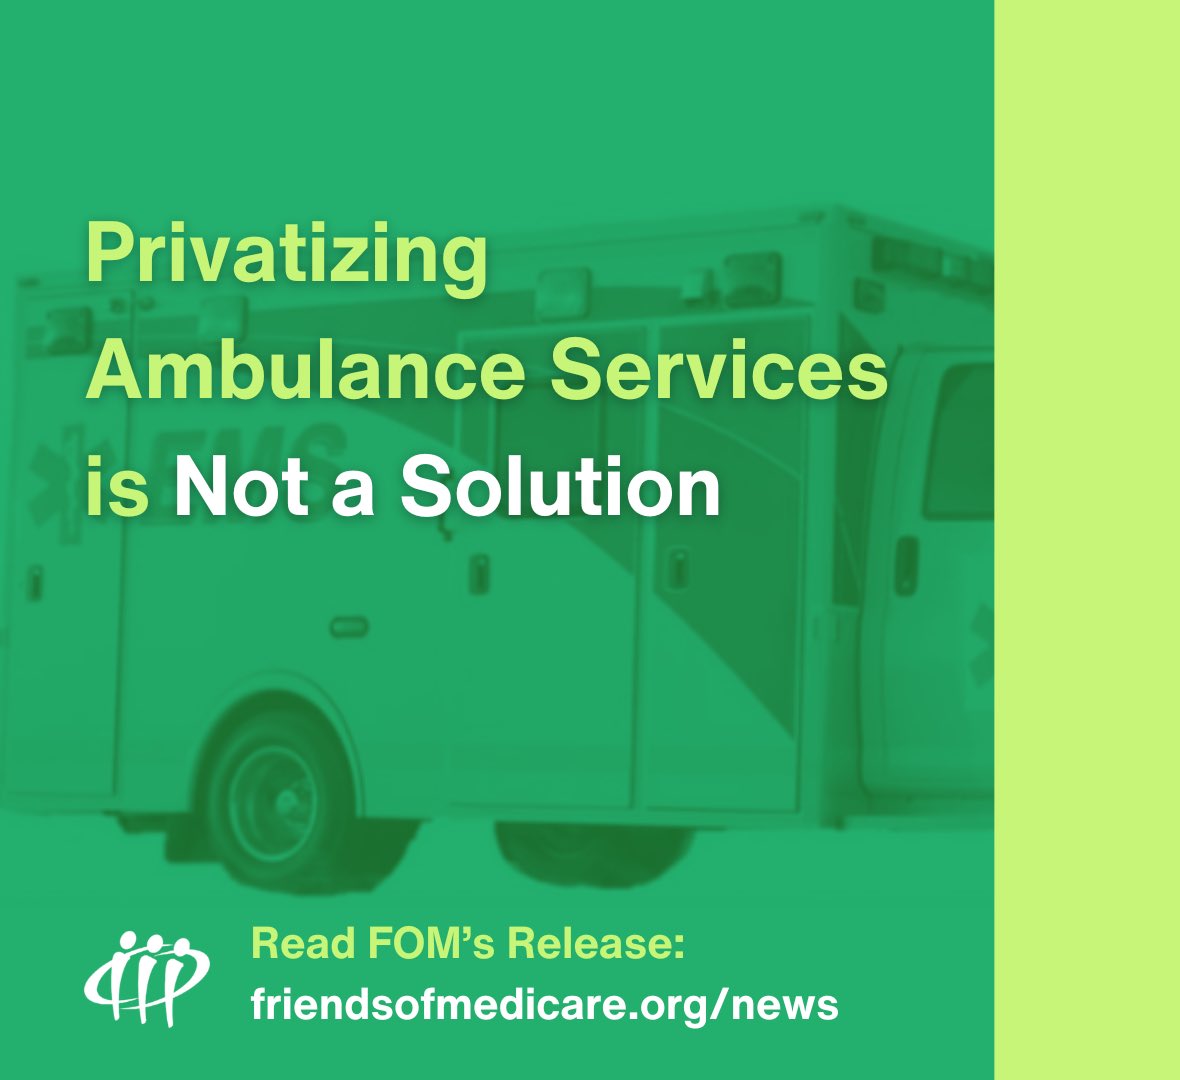 “Here we go again, another ideological decision from the UCP government that prioritizes contracts going to for-profit health care delivery rather than bolstering our public health care system.” Read more: friendsofmedicare.org/privatizing_am… #ableg #abhealth